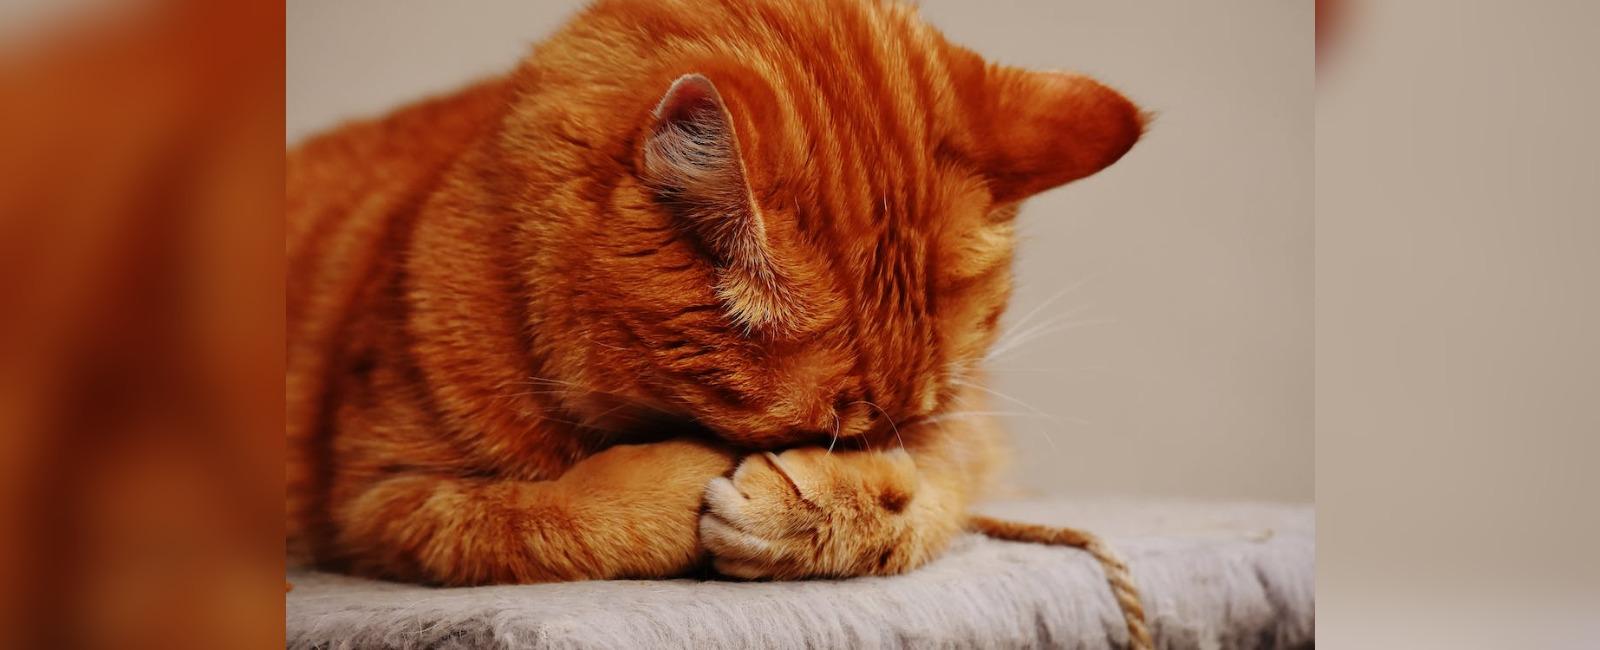 21 Warning Signs Your Cat is Crying for Help